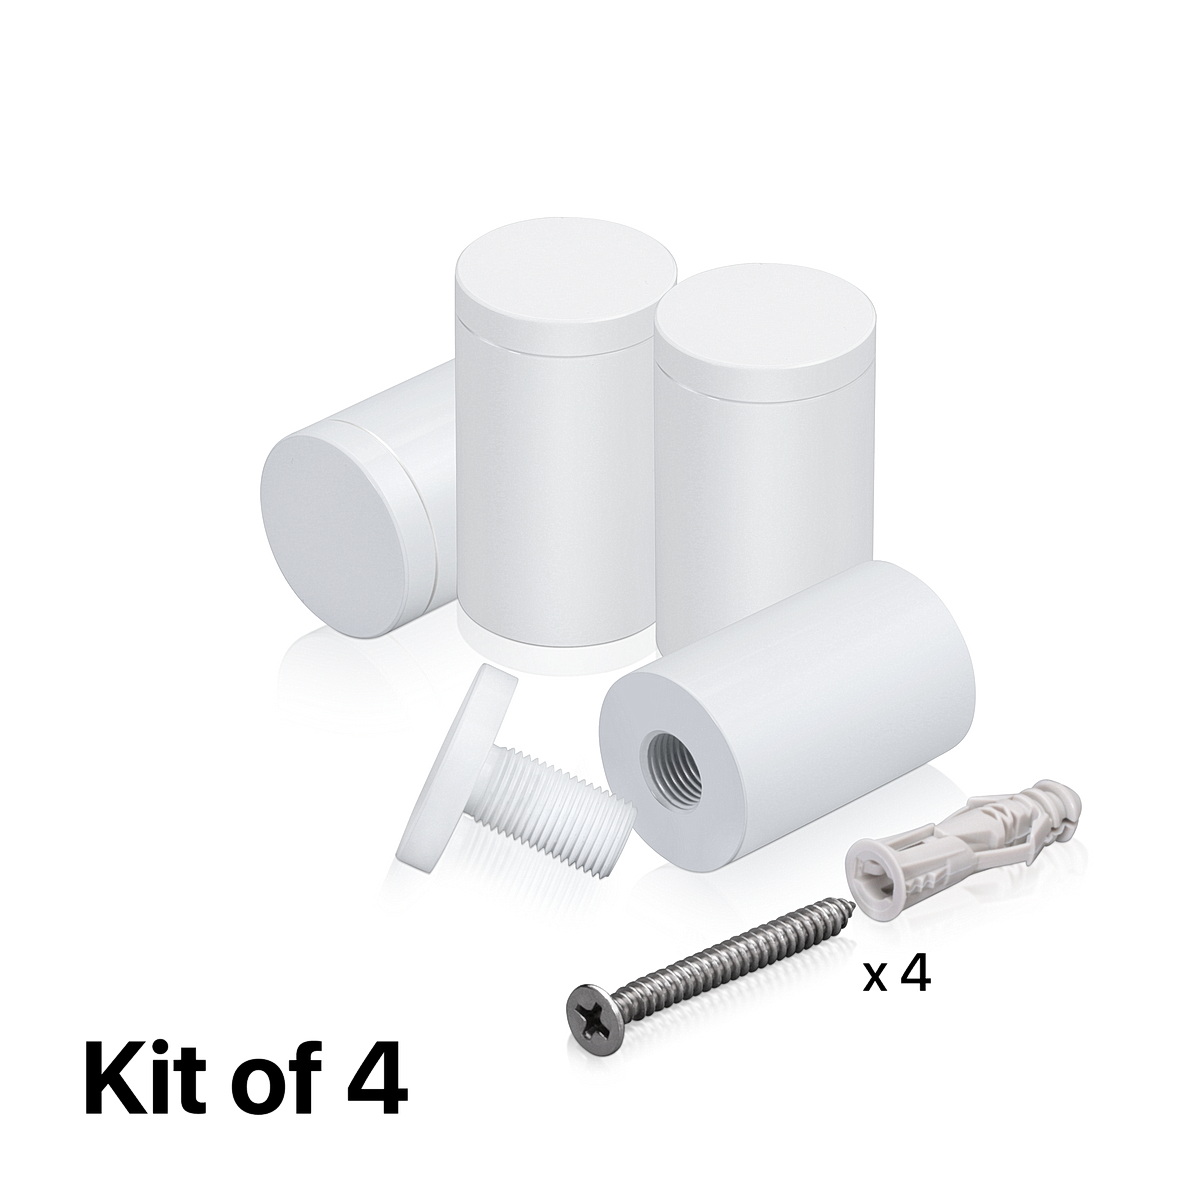 (Set of 4) 1'' Diameter X 1-1/2'' Barrel Length, Affordable Aluminum Standoffs, White Coated Finish Standoff and (4) 2216Z Screws and (4) LANC1 Anchors for concrete/drywall (For Inside/Outside) [Required Material Hole Size: 7/16'']